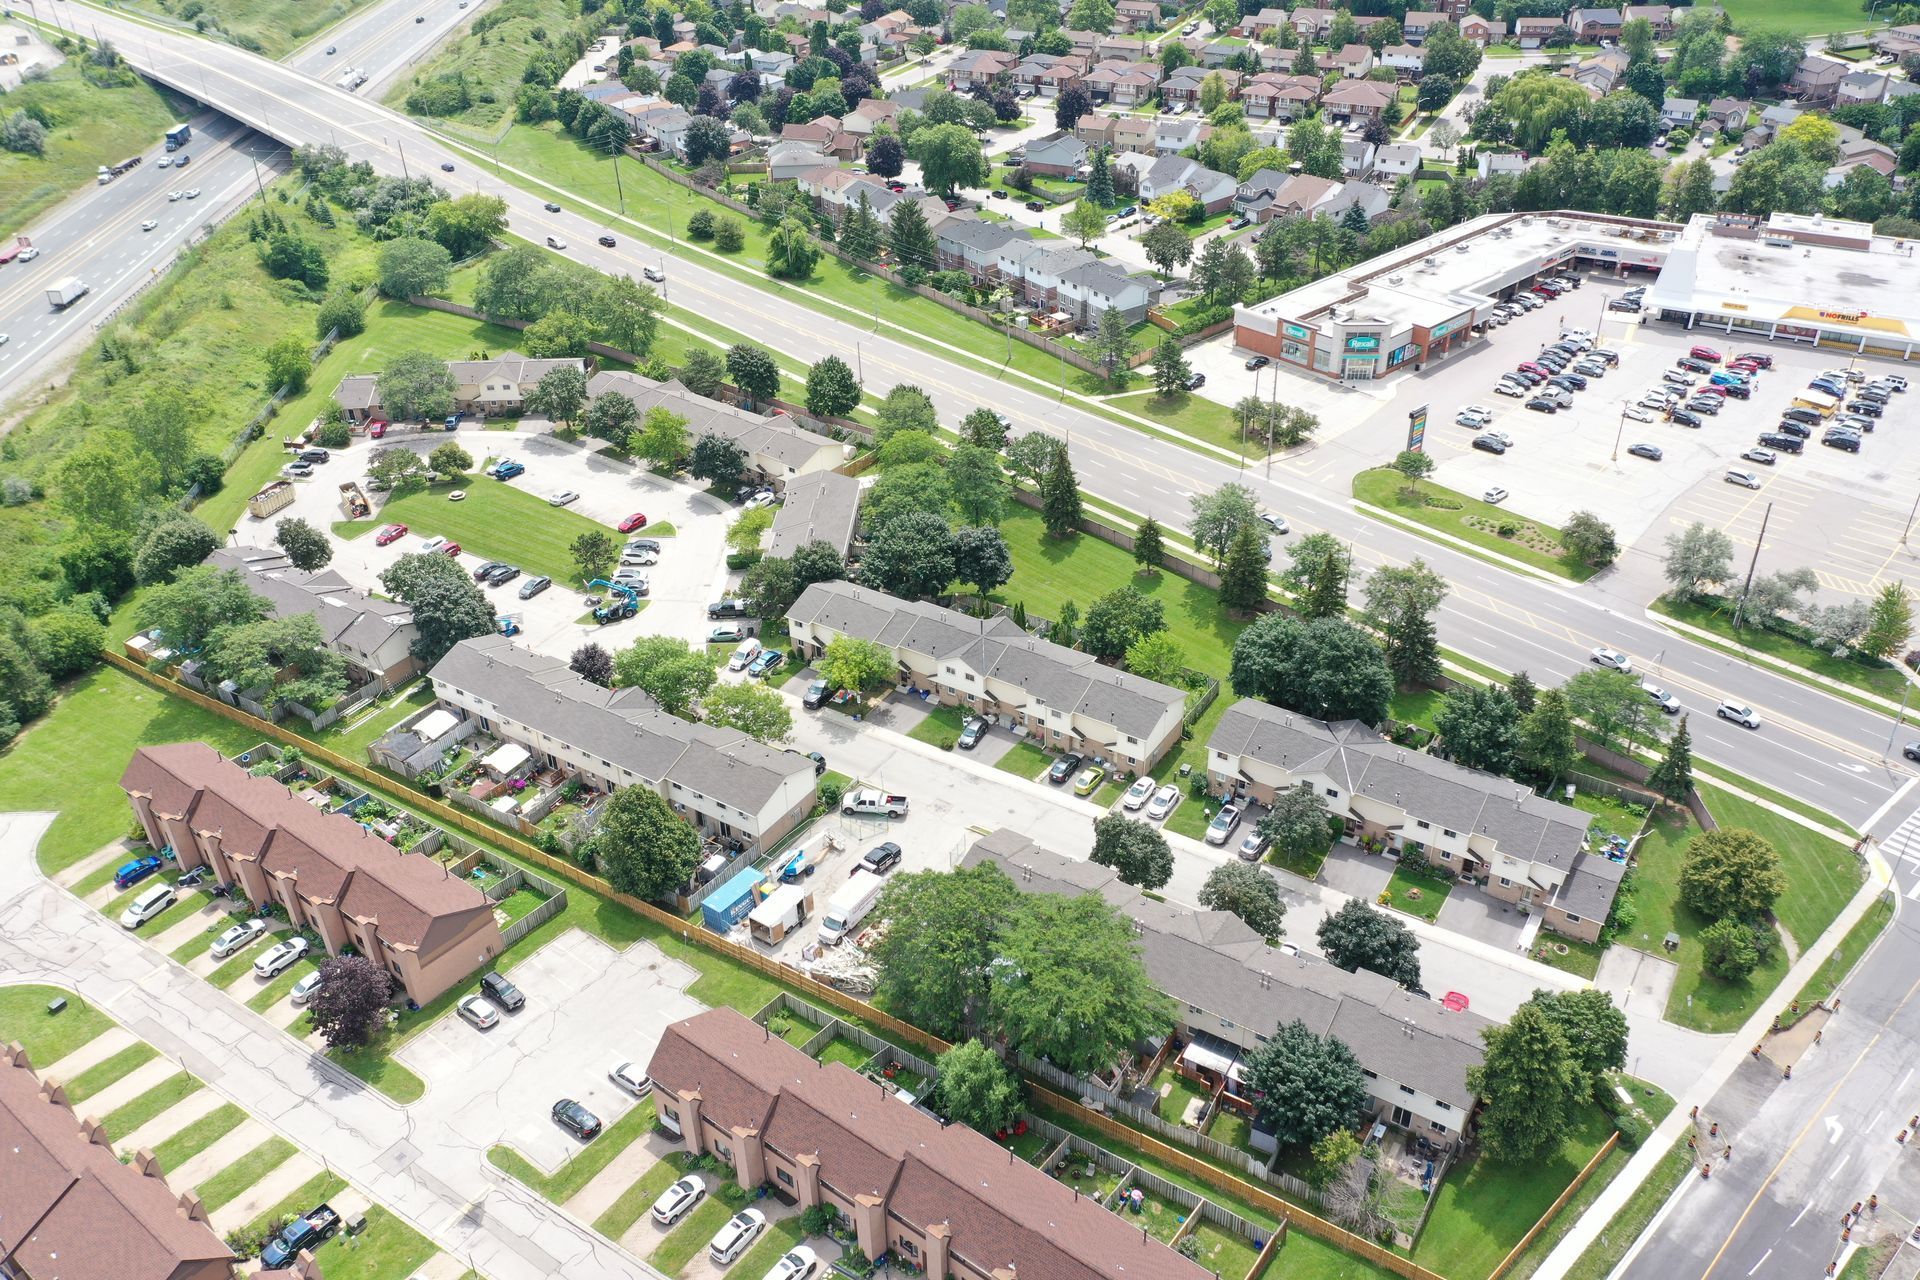 An aerial view of a residential area with lots of buildings and parking lots